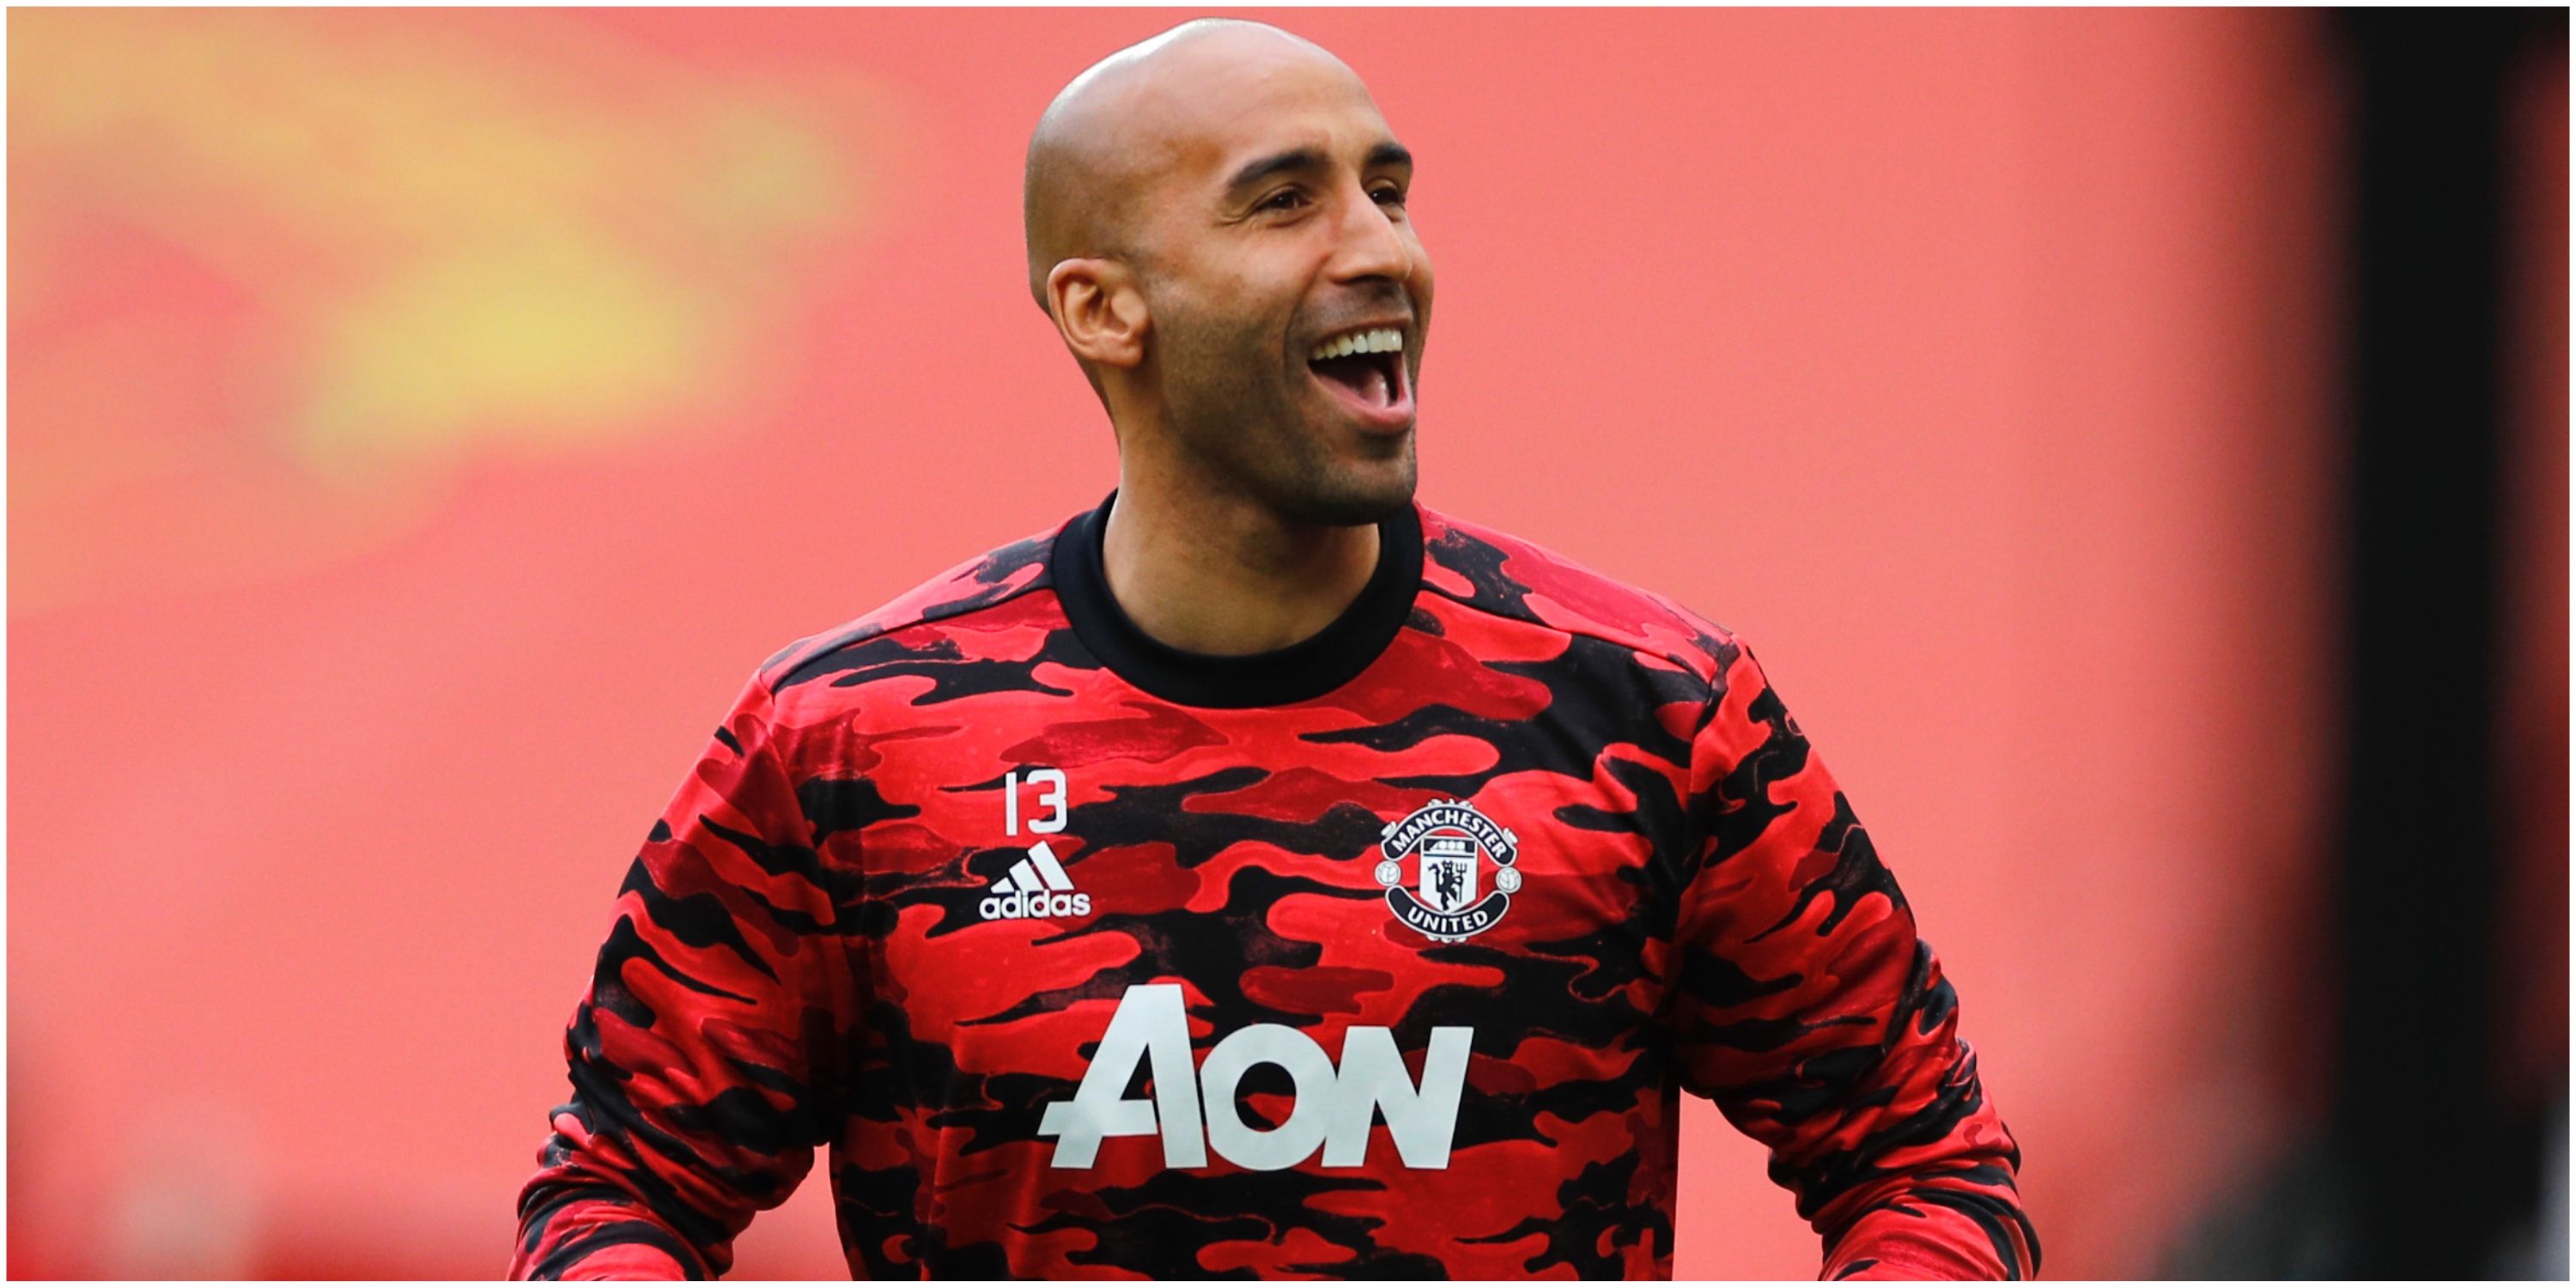 Ex-Man United goalkeeper is now one of the top striker coaches in English football